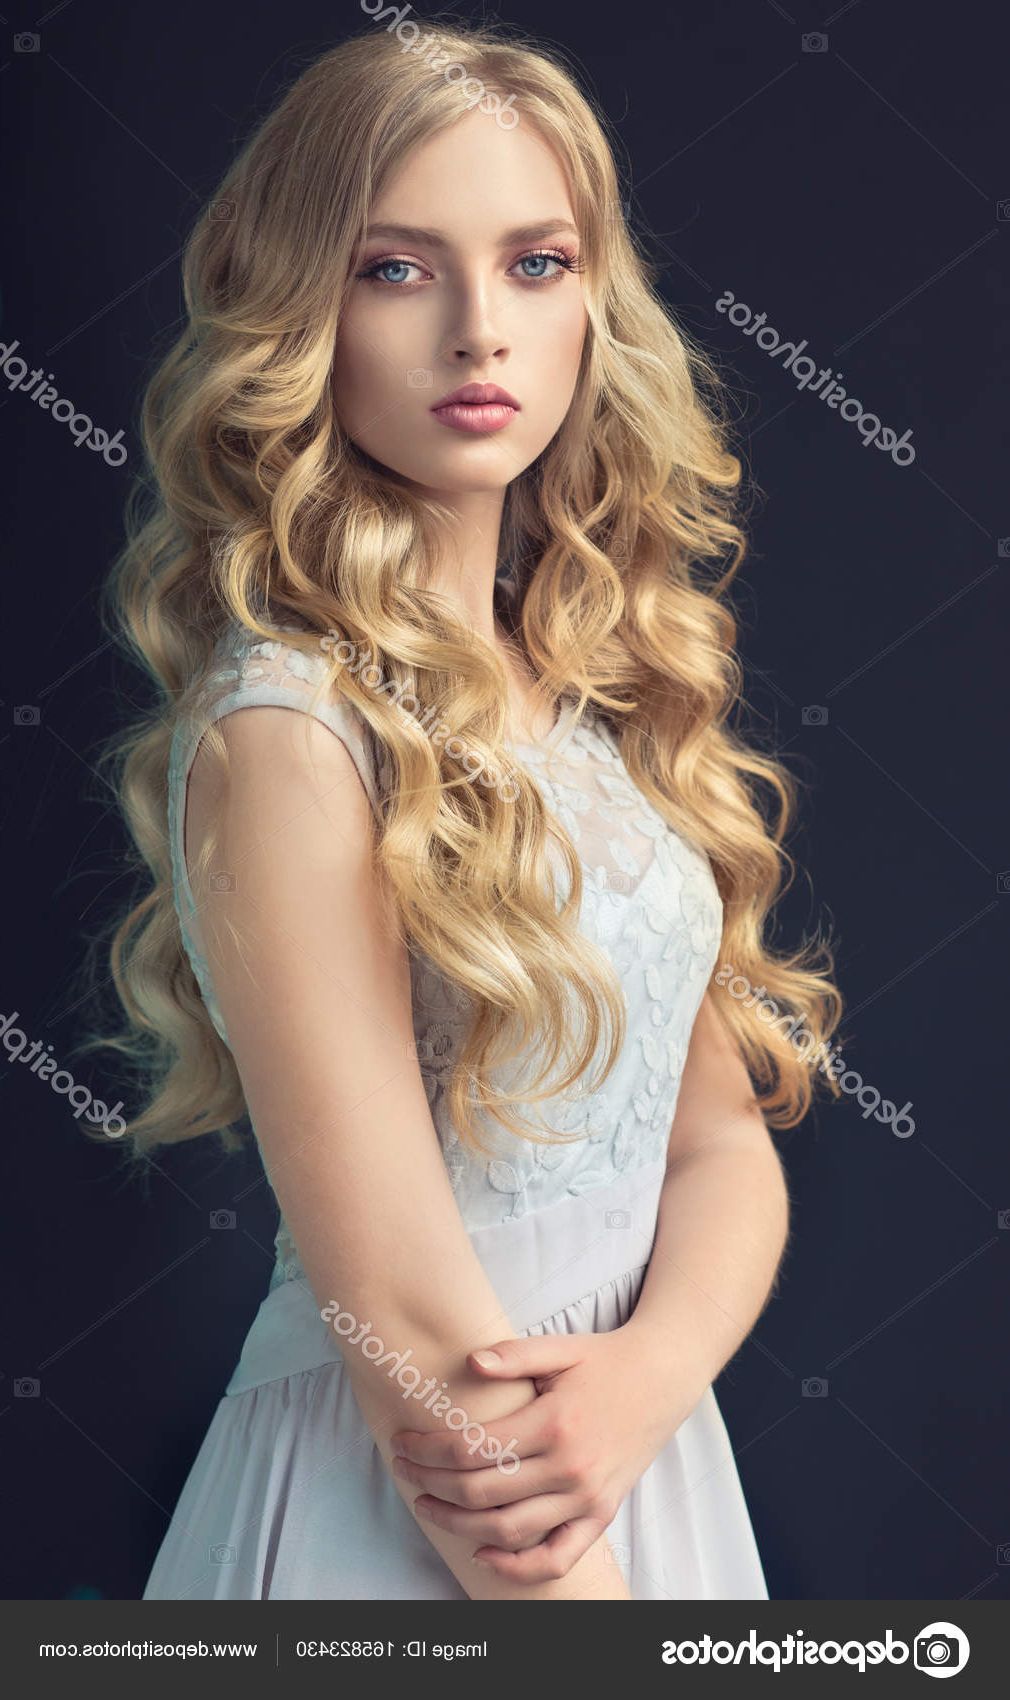 Well Known Shiny Tousled Curls Hairstyles In Blonde Girl With Long , Curly Hair — Stock Photo © Sofia_zhuravets (Gallery 20 of 20)